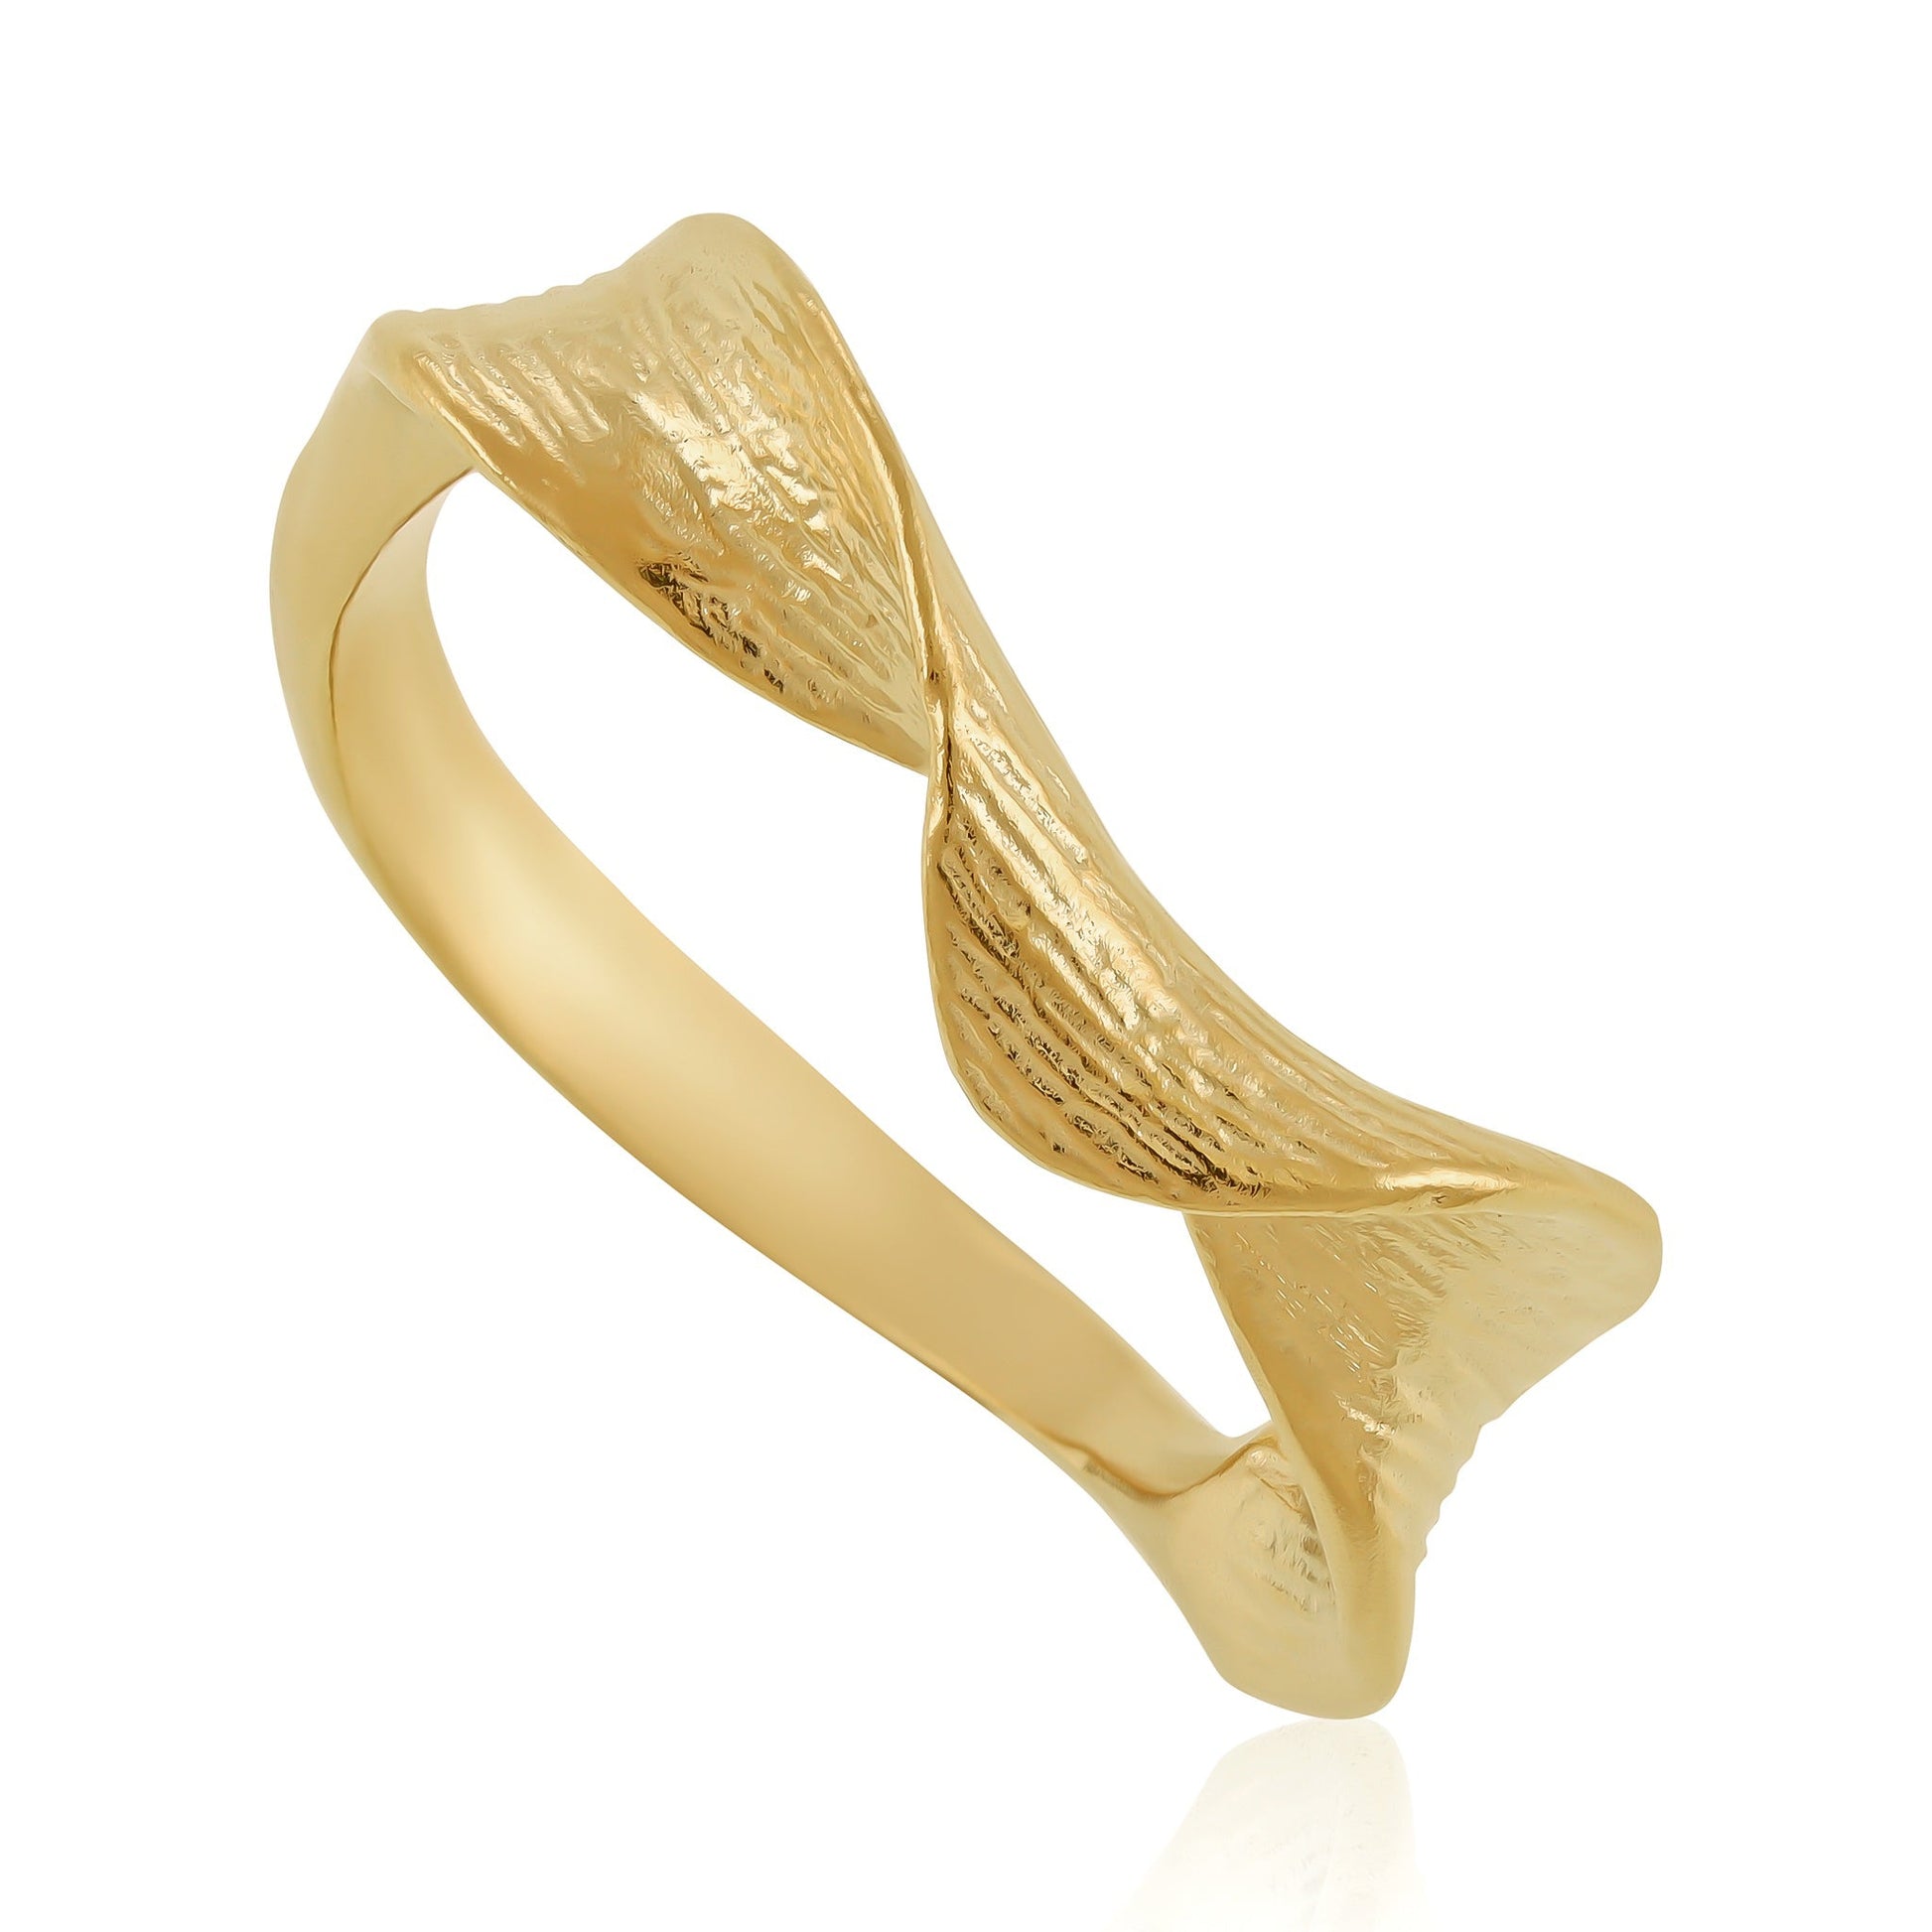 18ct 1 micron gold plated sterling silver twisted rings PRN3011 - FJewellery